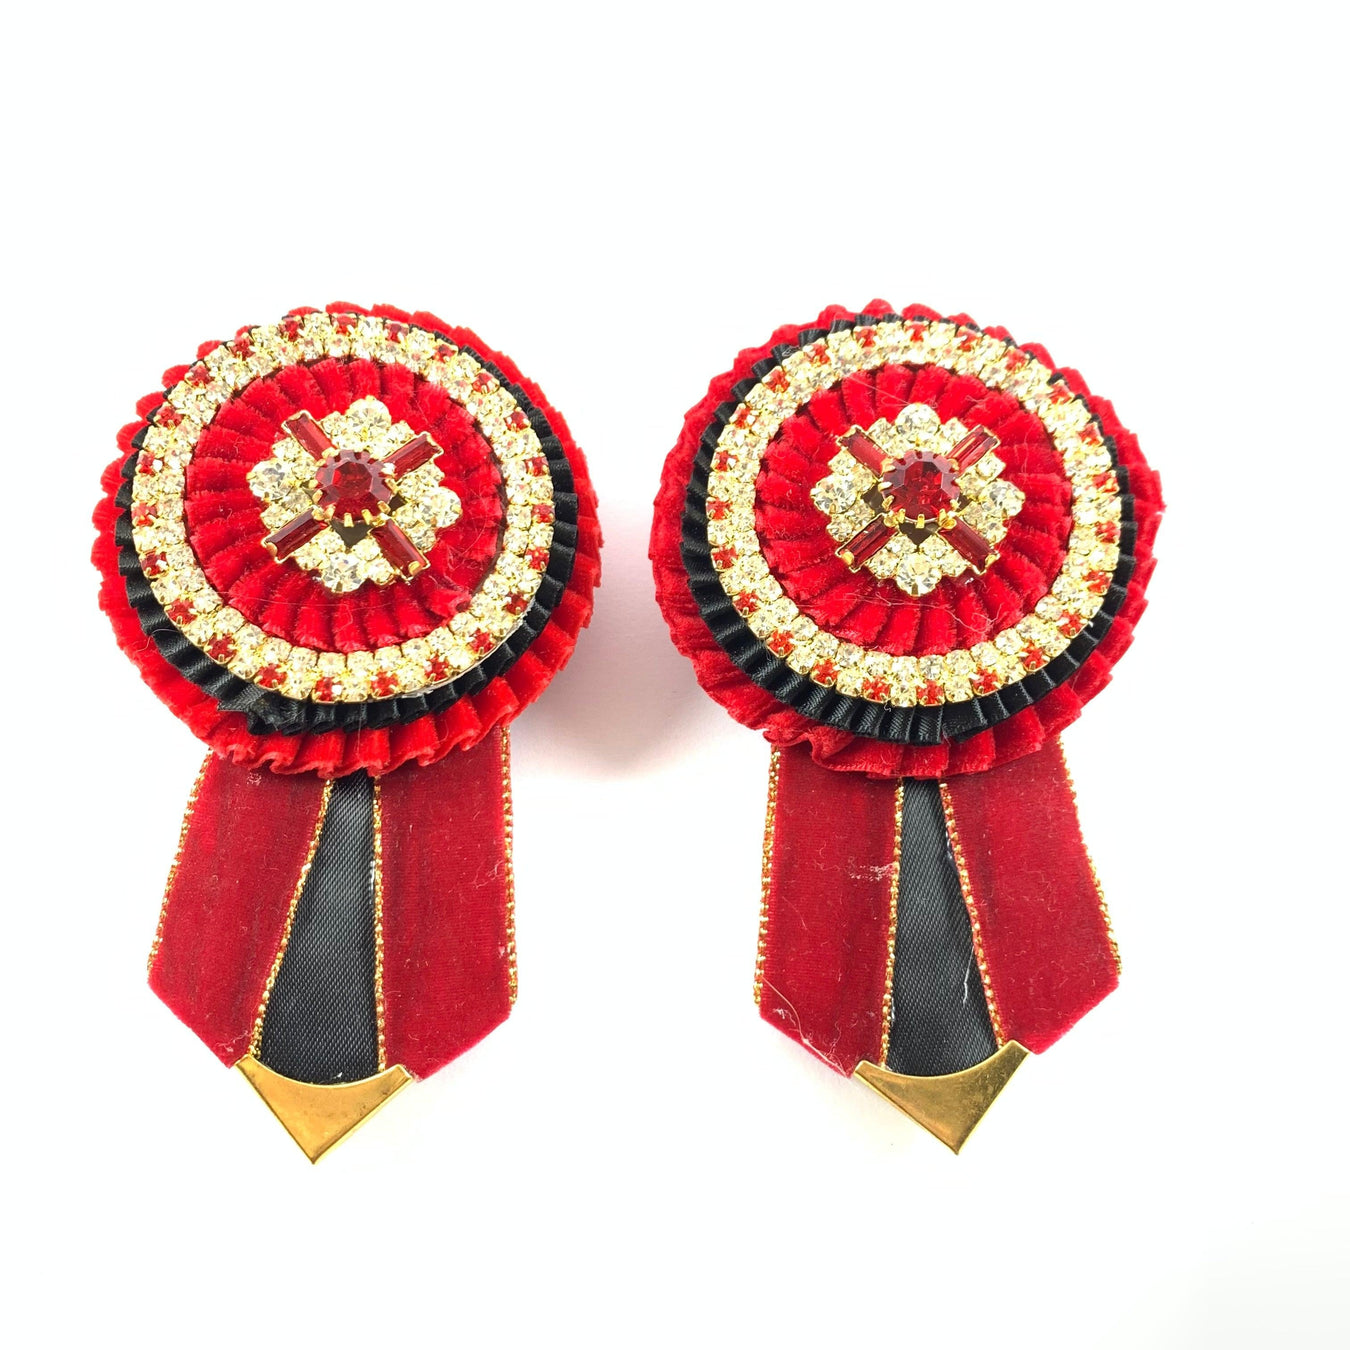 Removable Rosettes - Statement Horse Tack